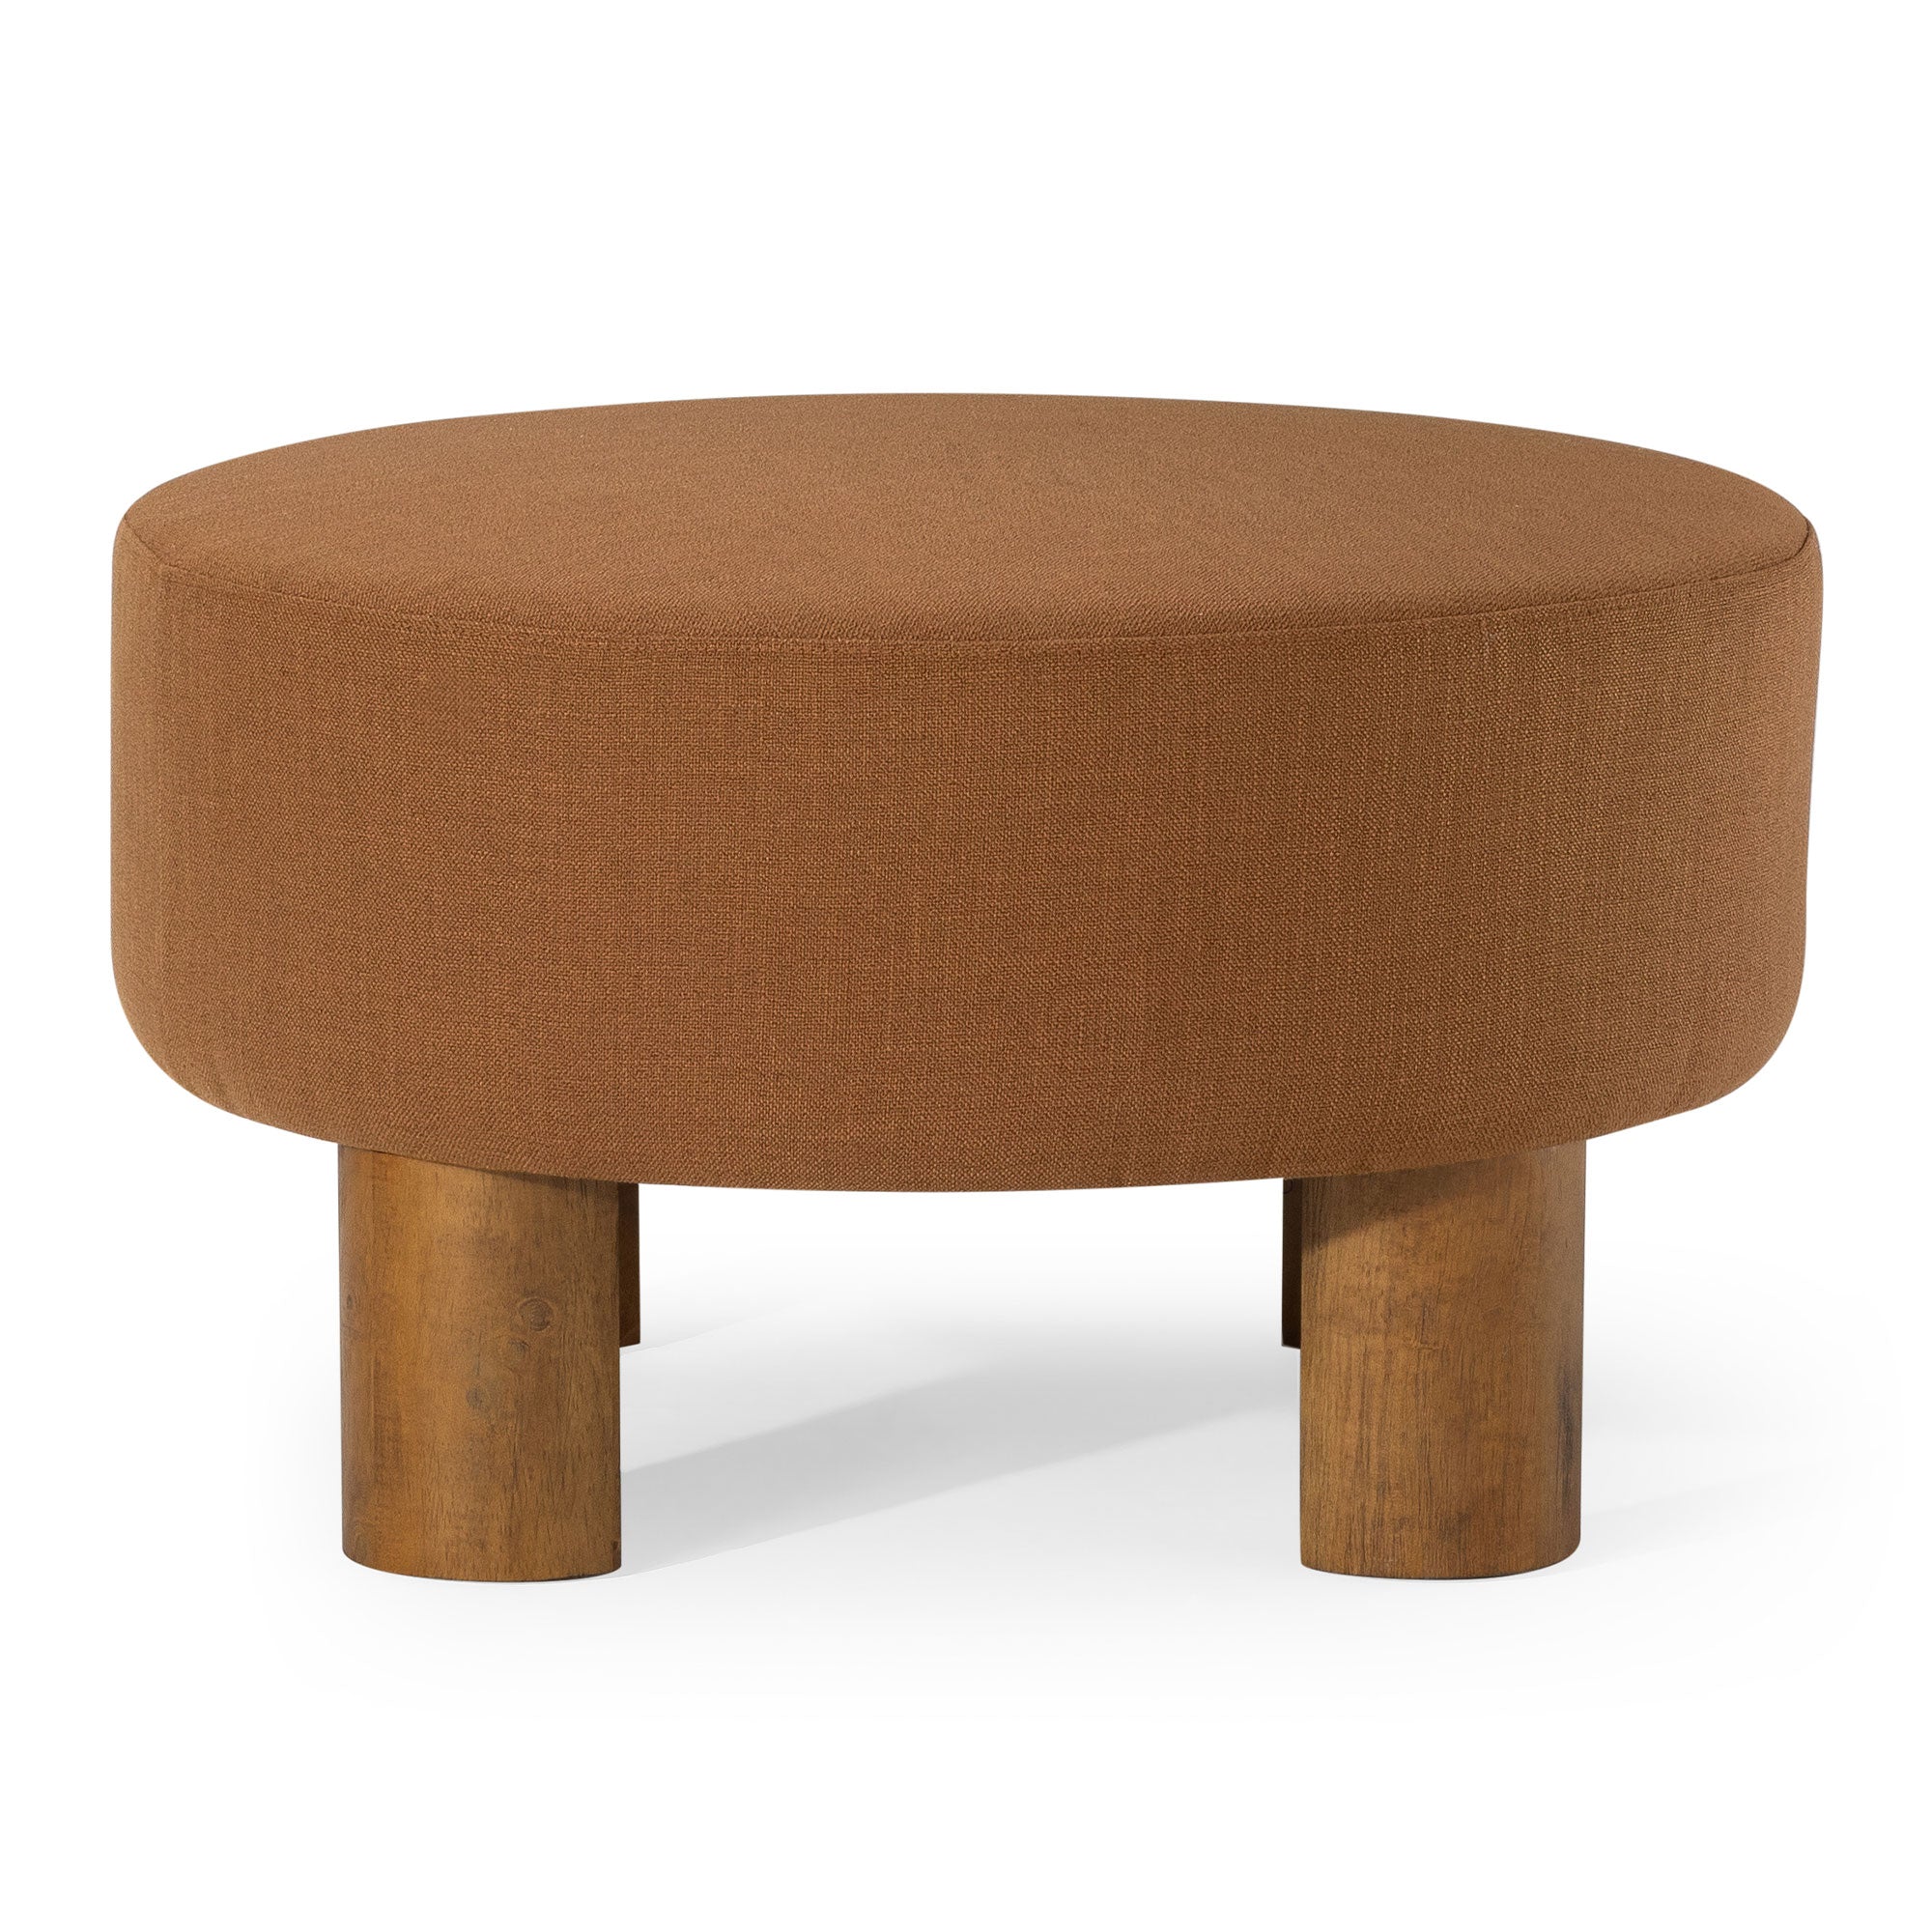 Celia Contemporary Upholstered Ottoman with Refined Brown Wood Finish in Ottomans & Benches by Maven Lane